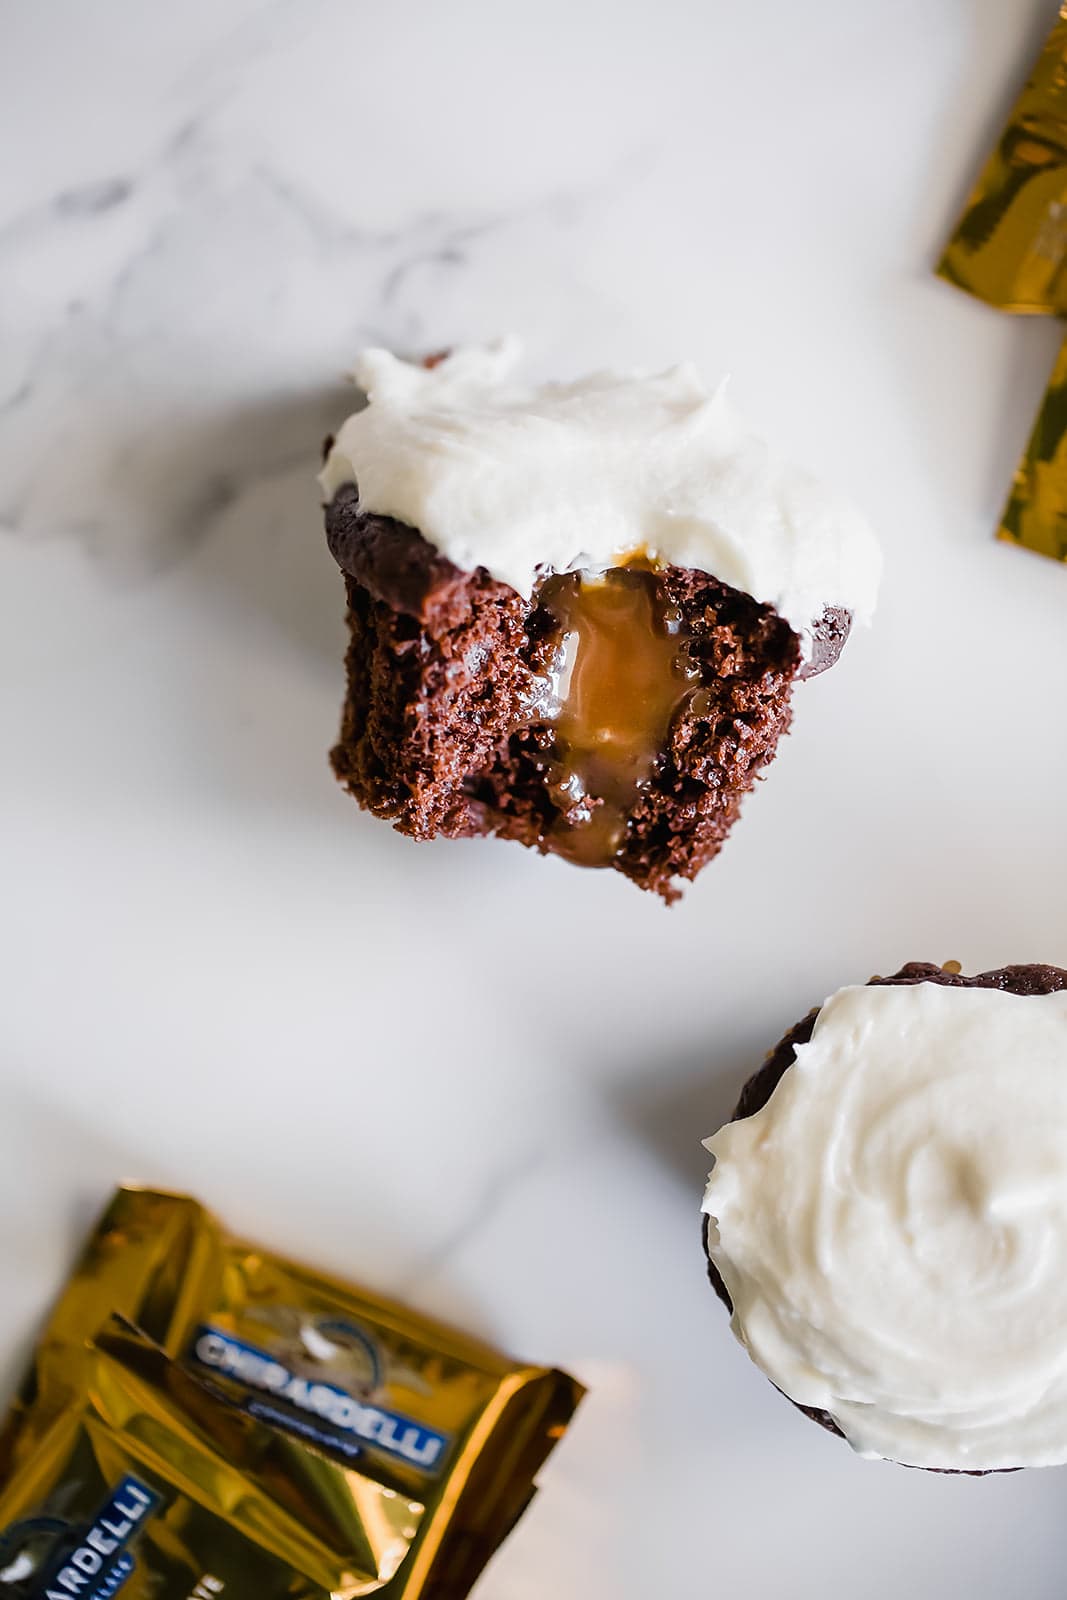 Caramel Stuffed Chocolate Cupcakes feature a super moist and tender chocolate cupcake filled with luscious caramel sauce and topped with vanilla buttercream.